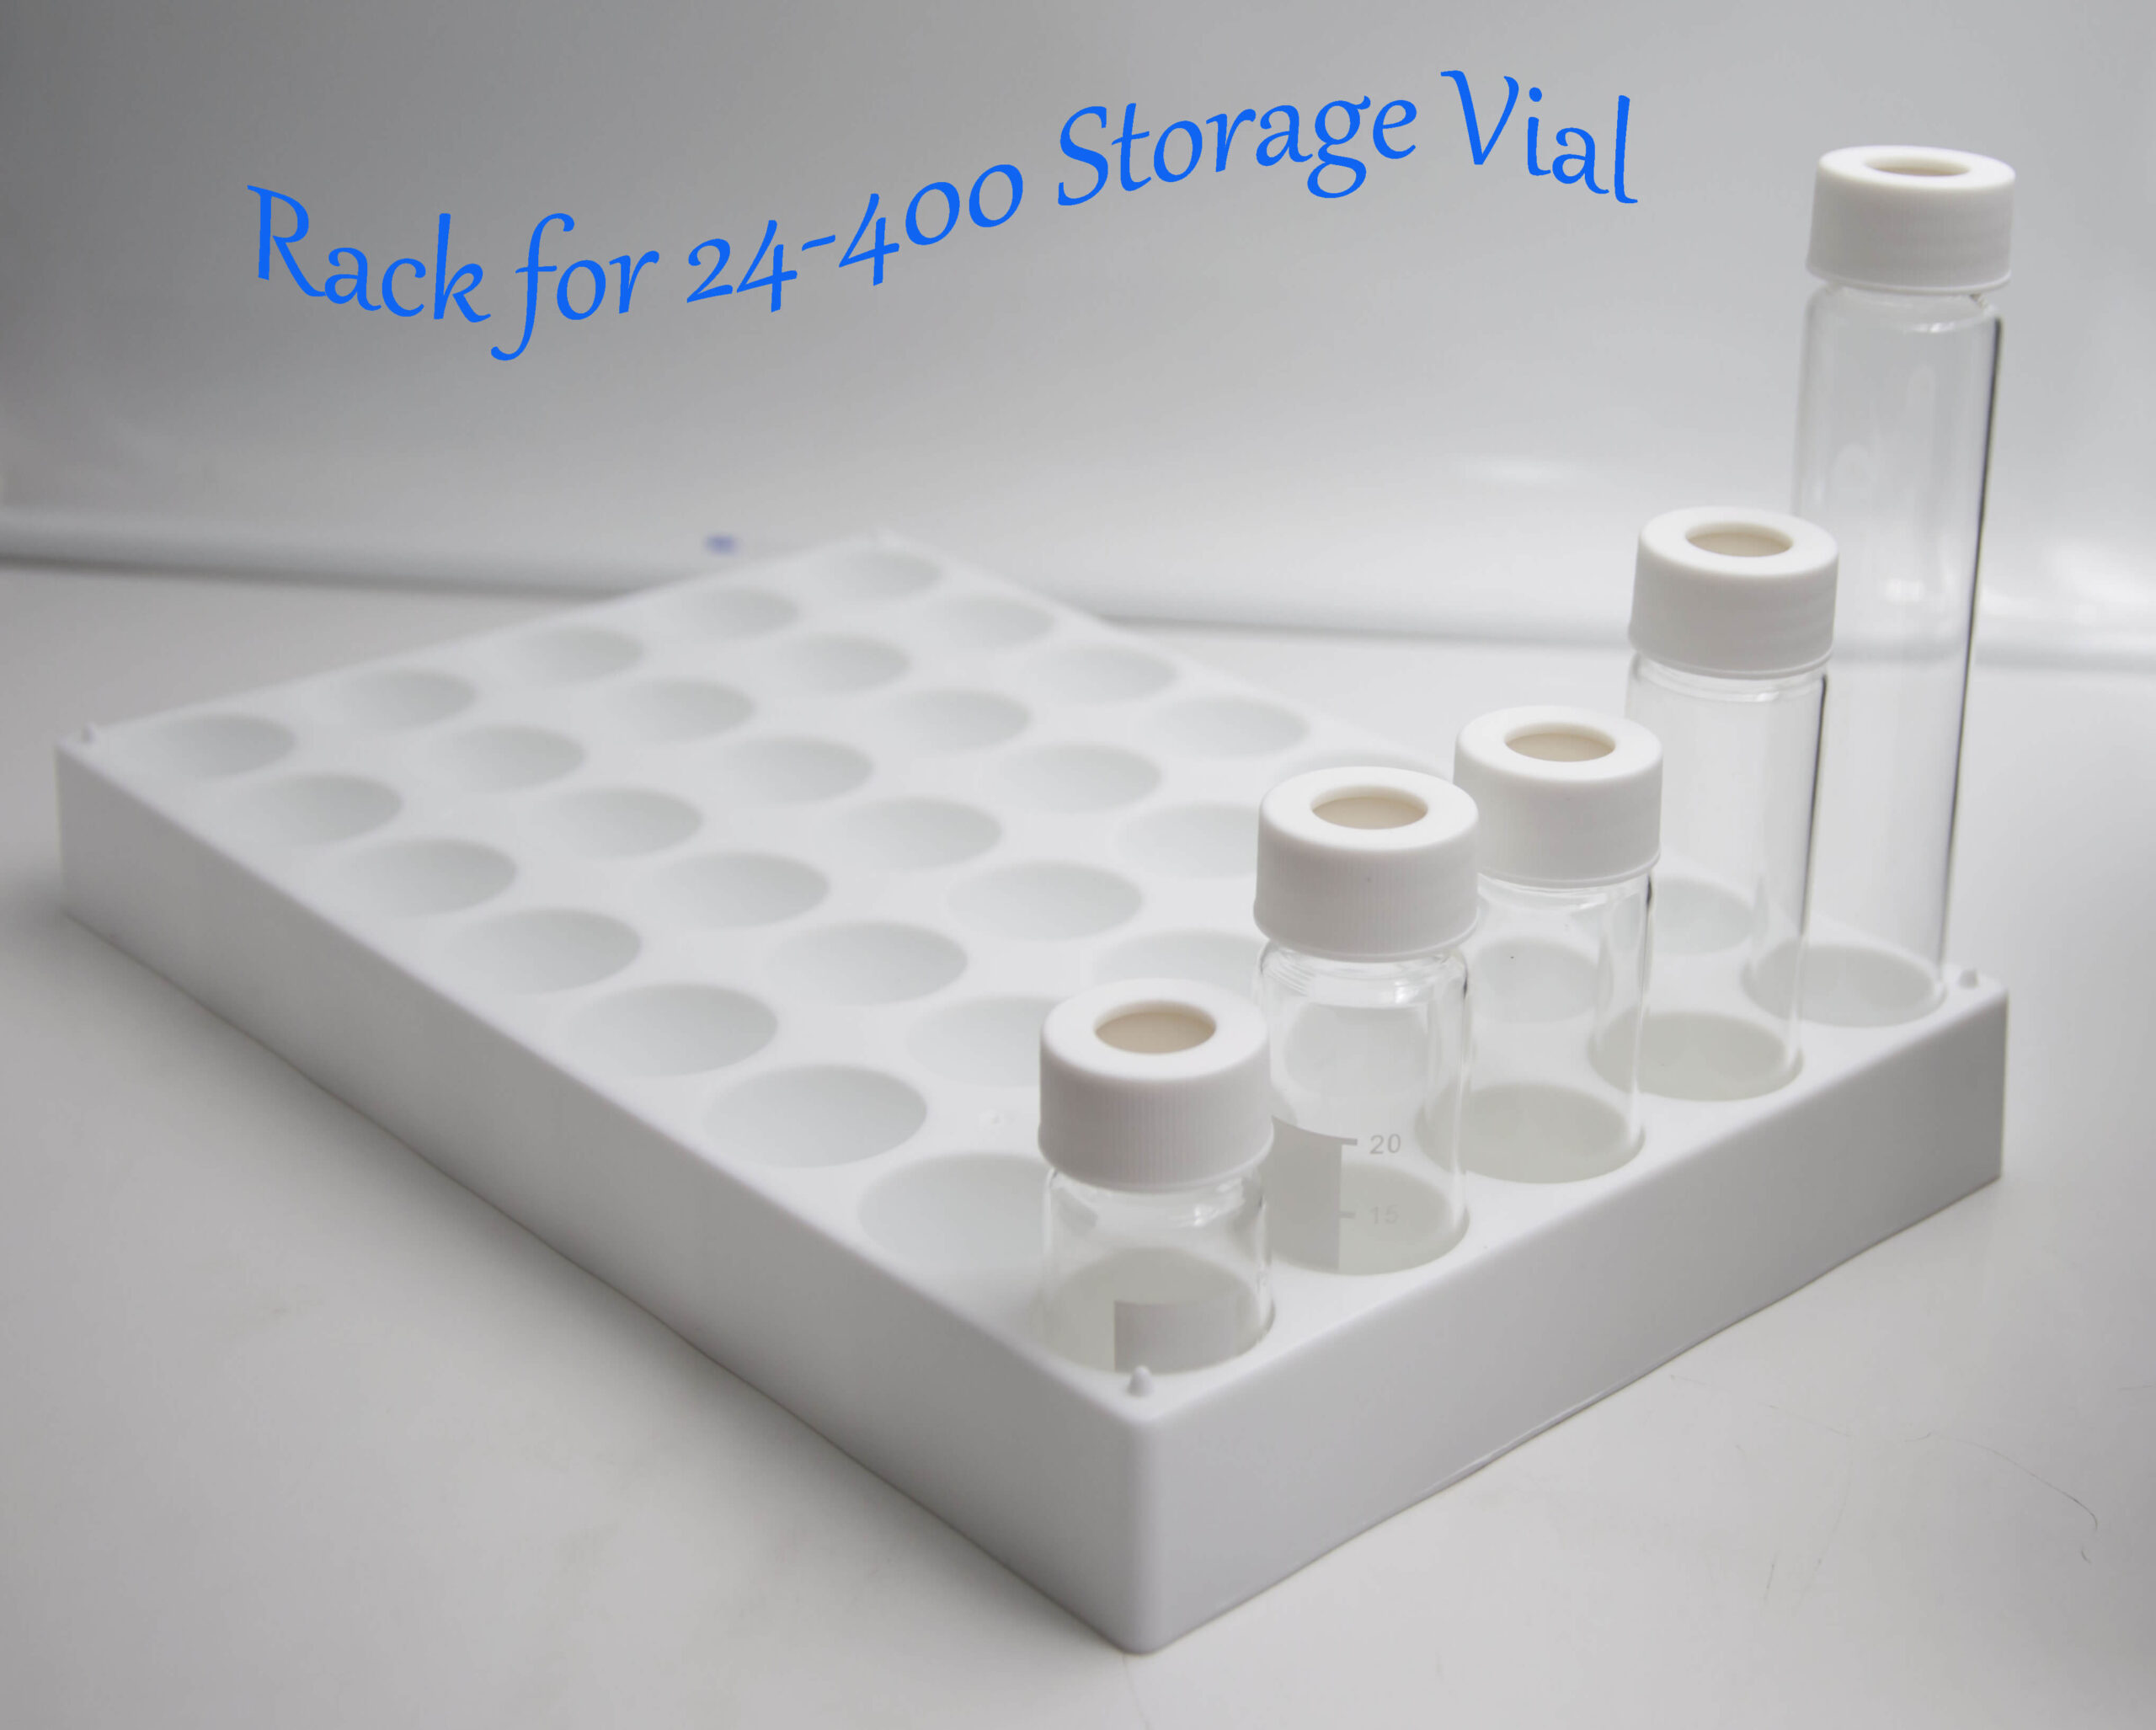 Rack for 24-400 Screw Neck Storage Vial for Sale